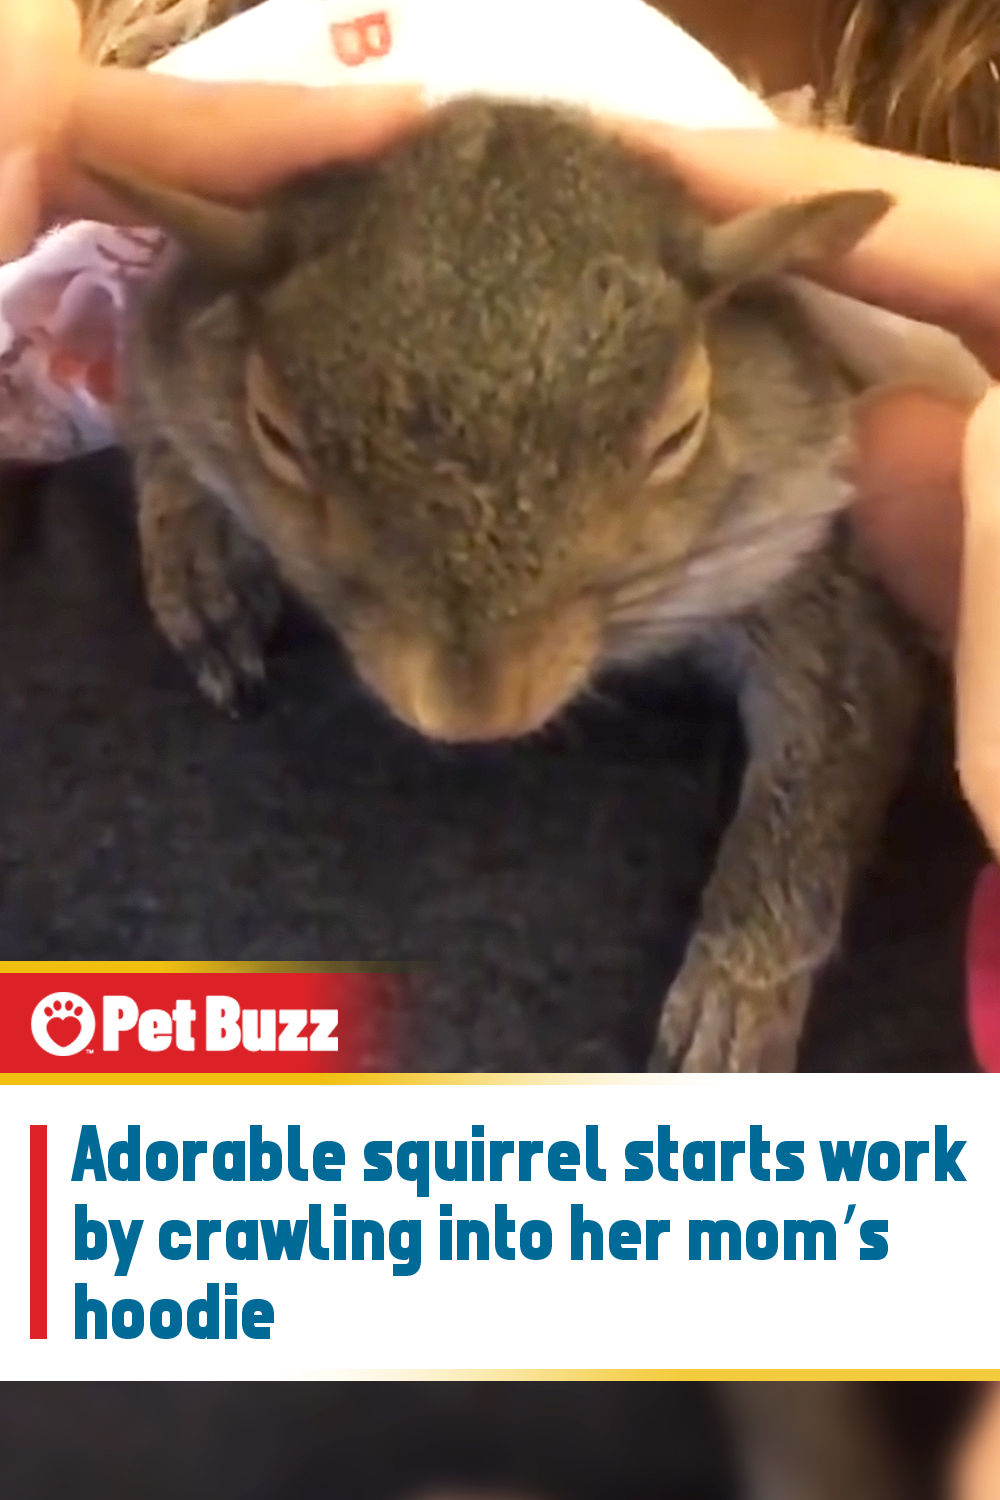 Adorable squirrel starts work by crawling into her mom’s hoodie